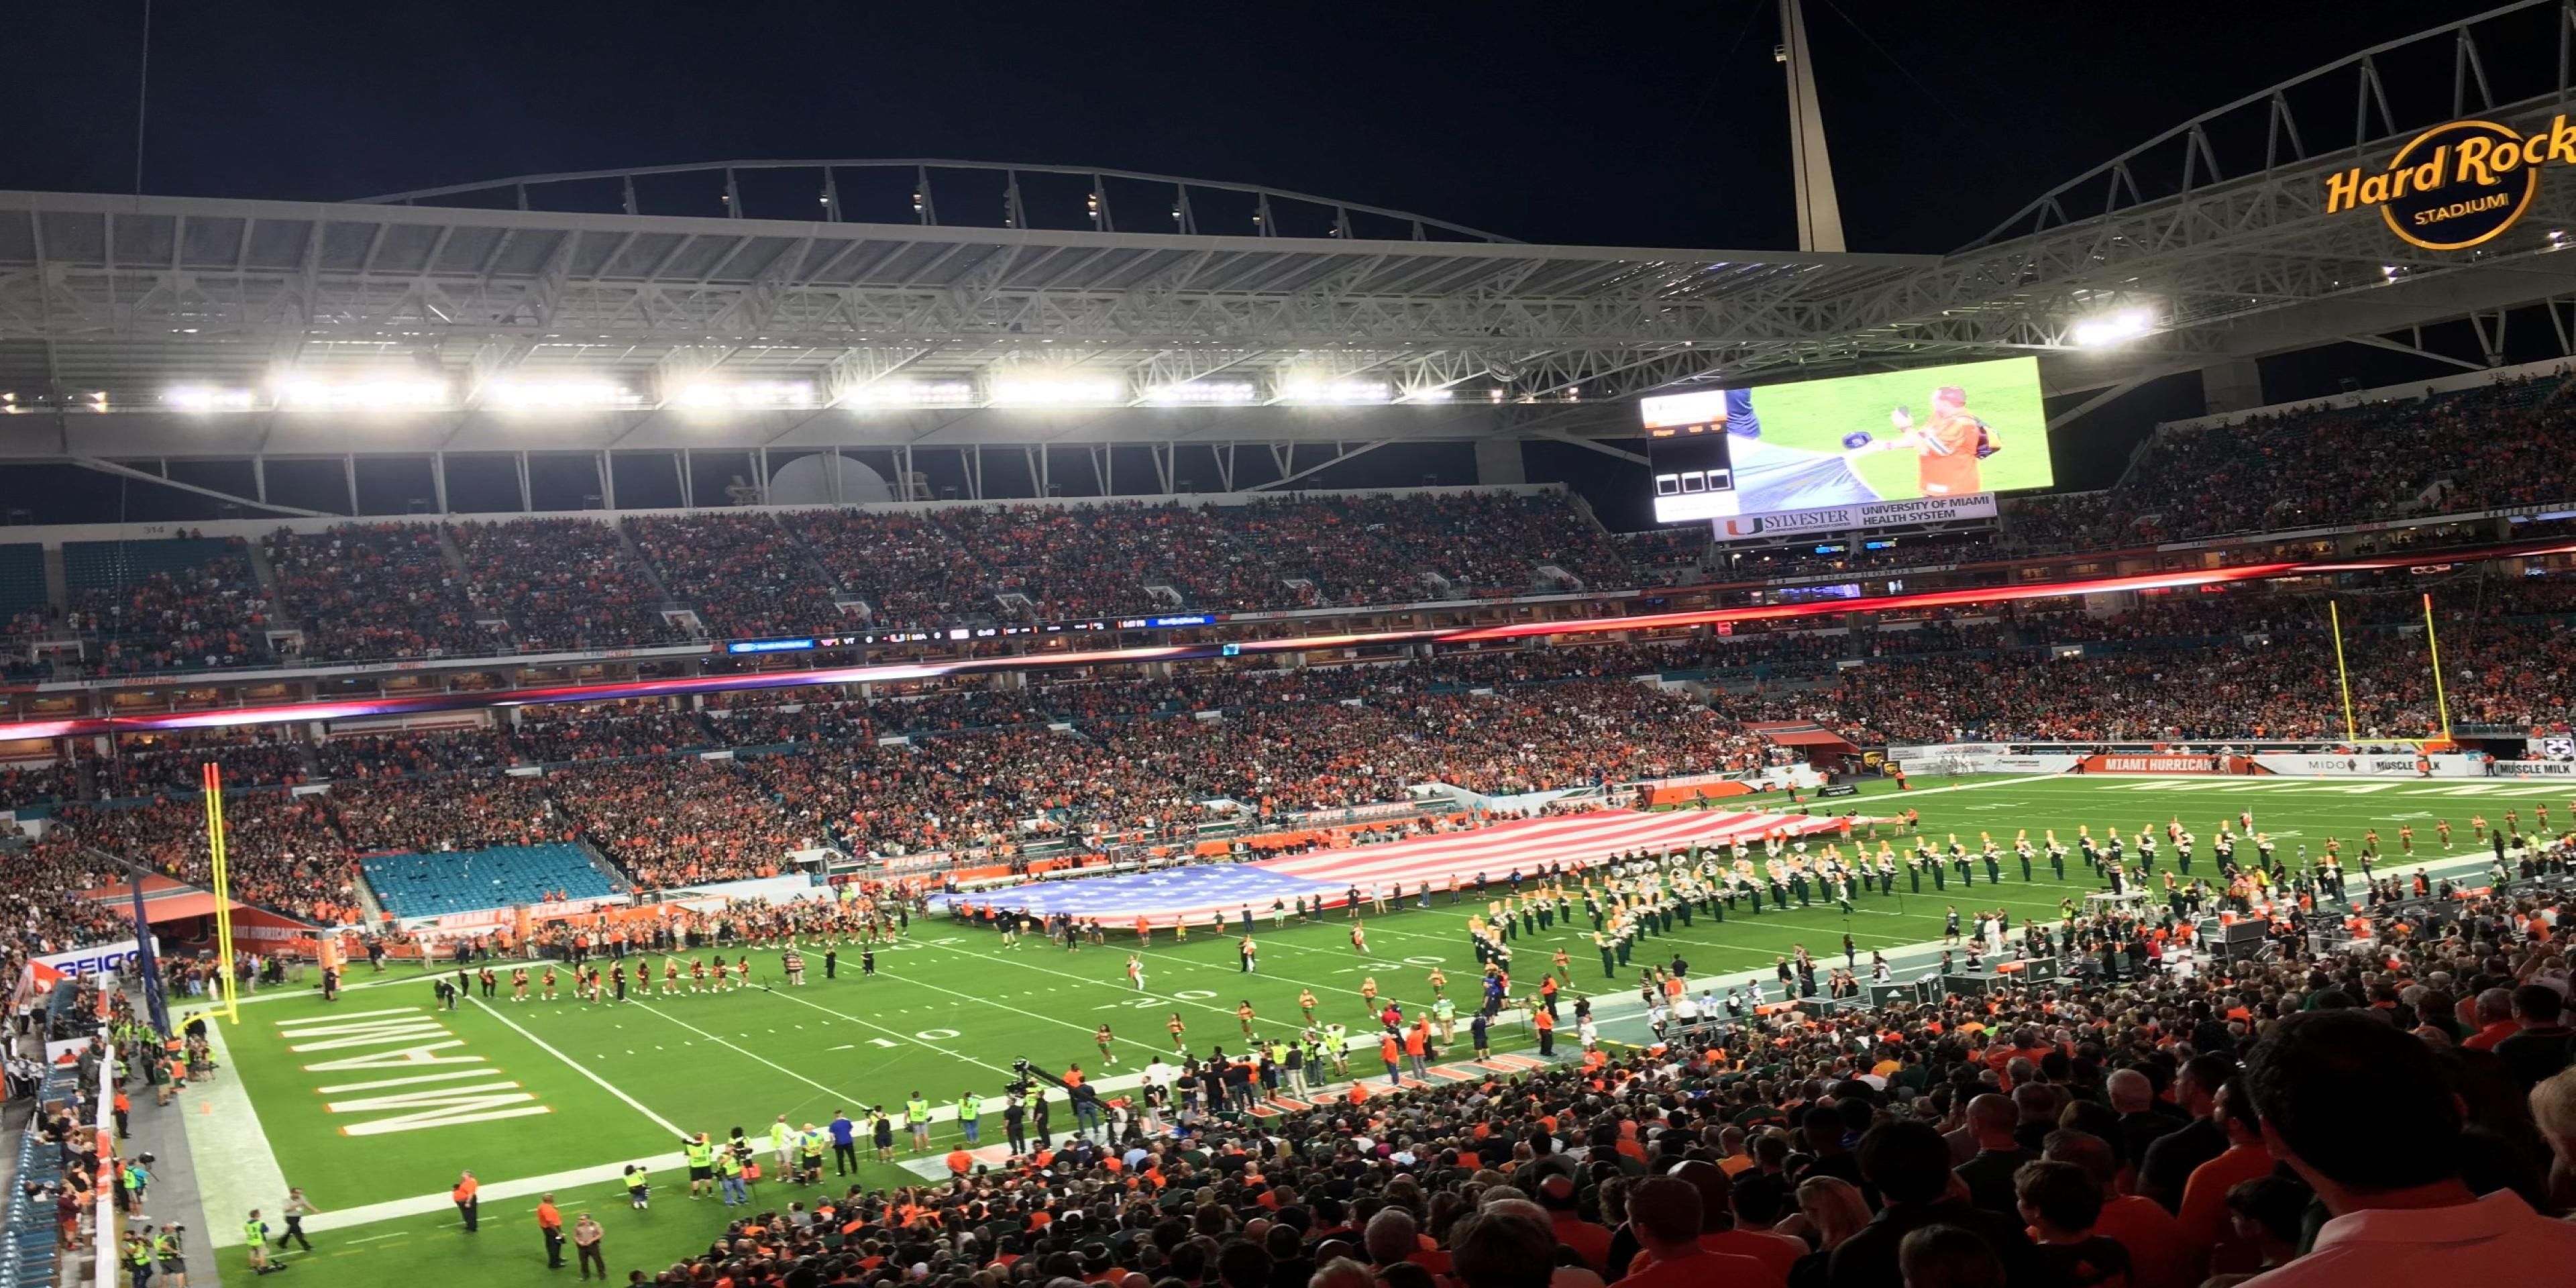 We are just an easy 15 minute drive (7.4 miles) from Hard Rock Stadium, home to the Miami Dolphins, University of Miami Hurricanes football, and many concerts and events.  